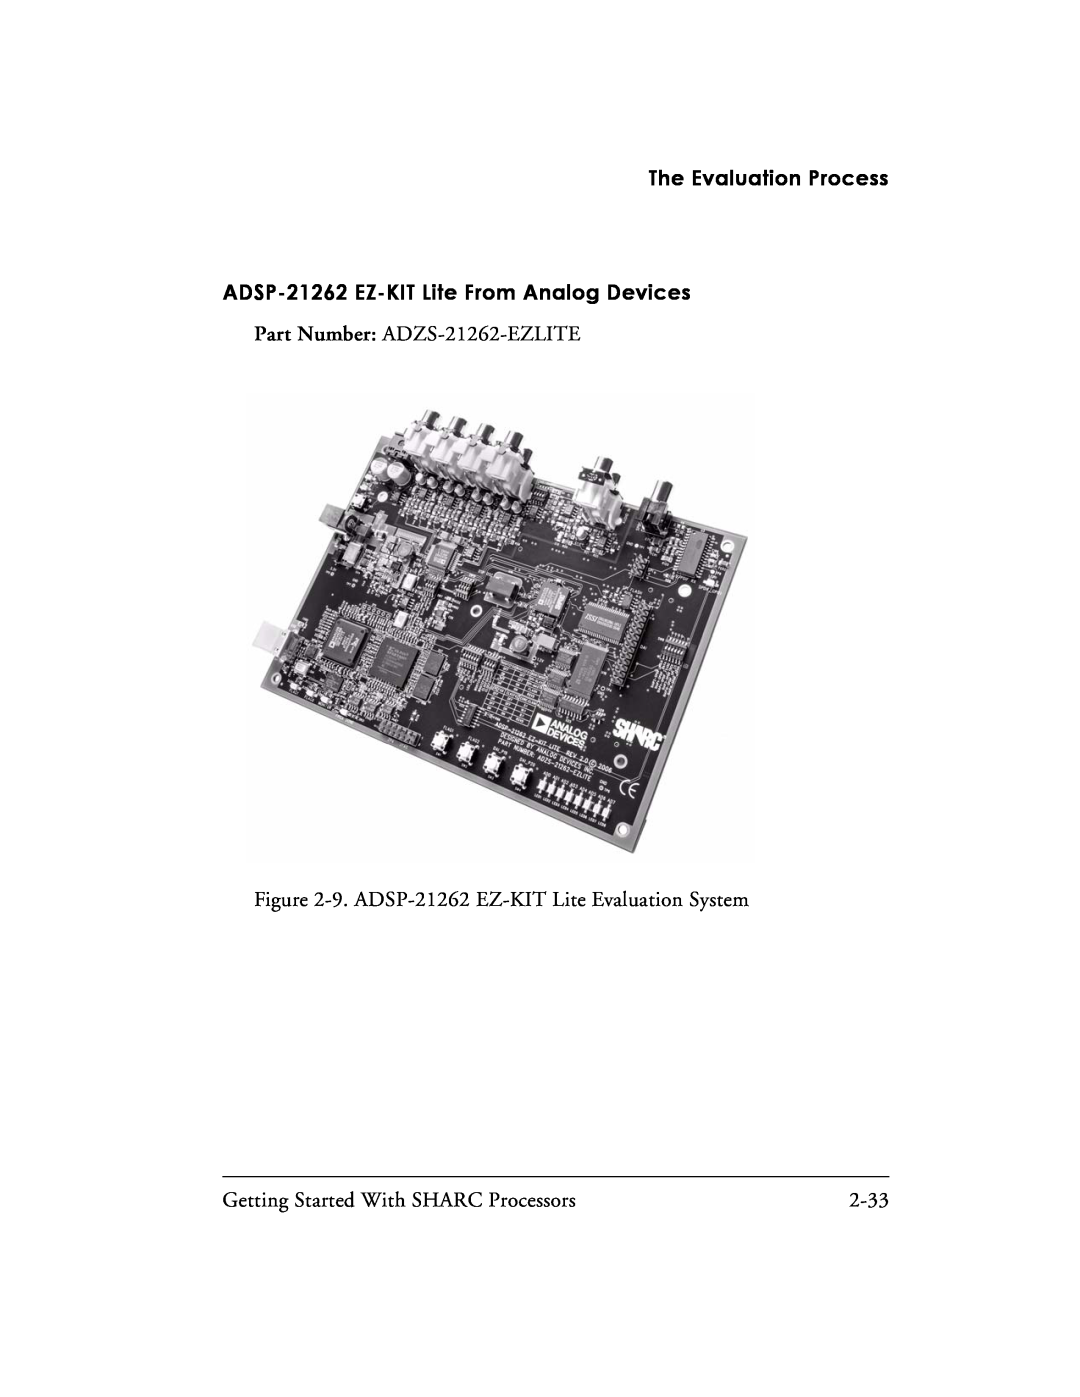 Analog Devices 82-003536-01 manual ADSP-21262 EZ-KITLite From Analog Devices, The Evaluation Process, 2-33 